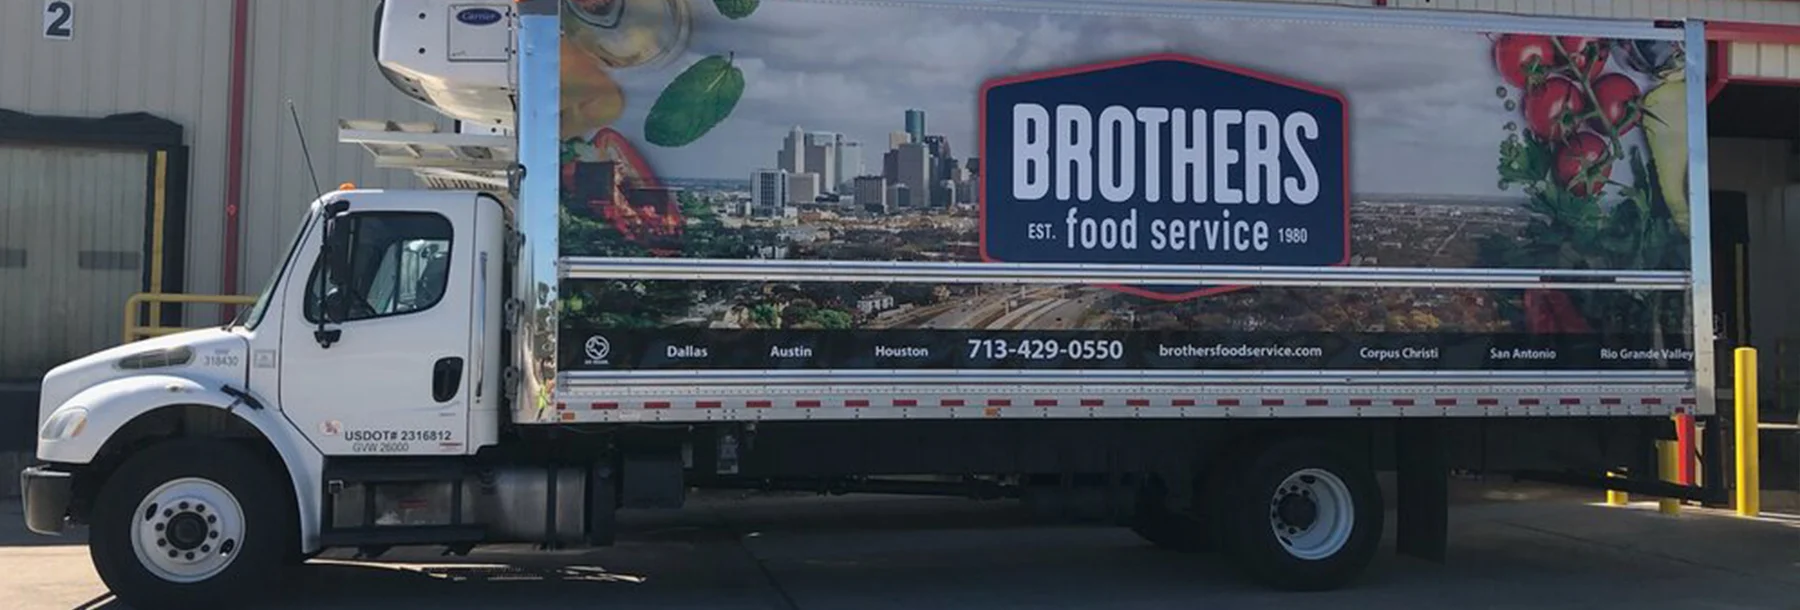 Brothers Food Services Truck